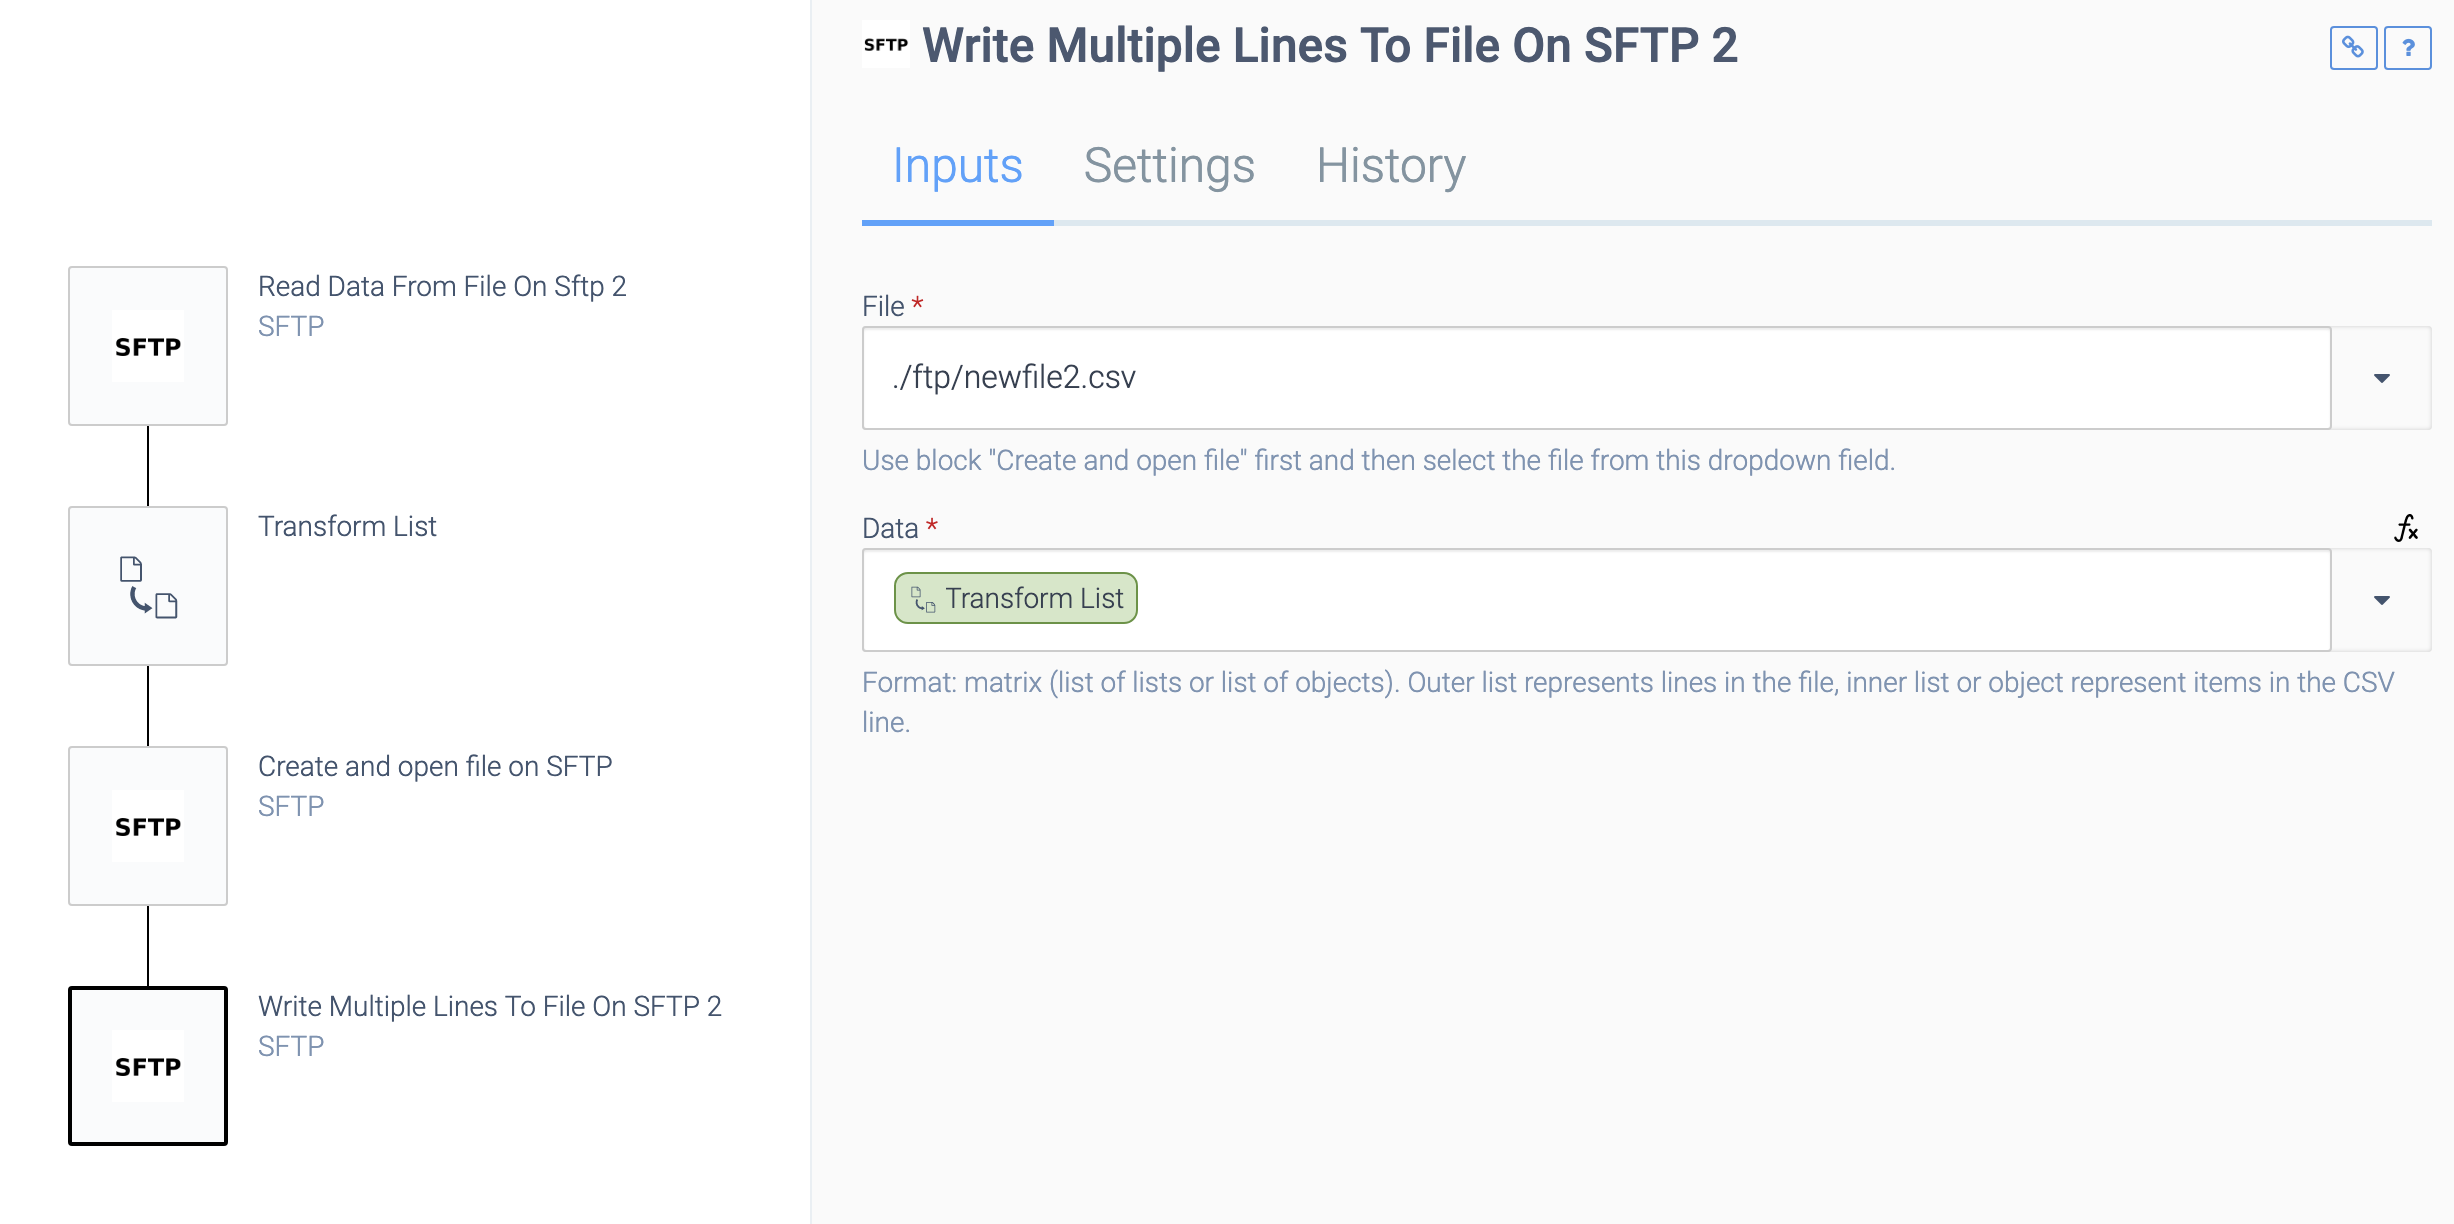 As above, but the Write Multiple Lines To File On SFTP block is selected. It accesses a newly created file and writes the output of the Transform List block.